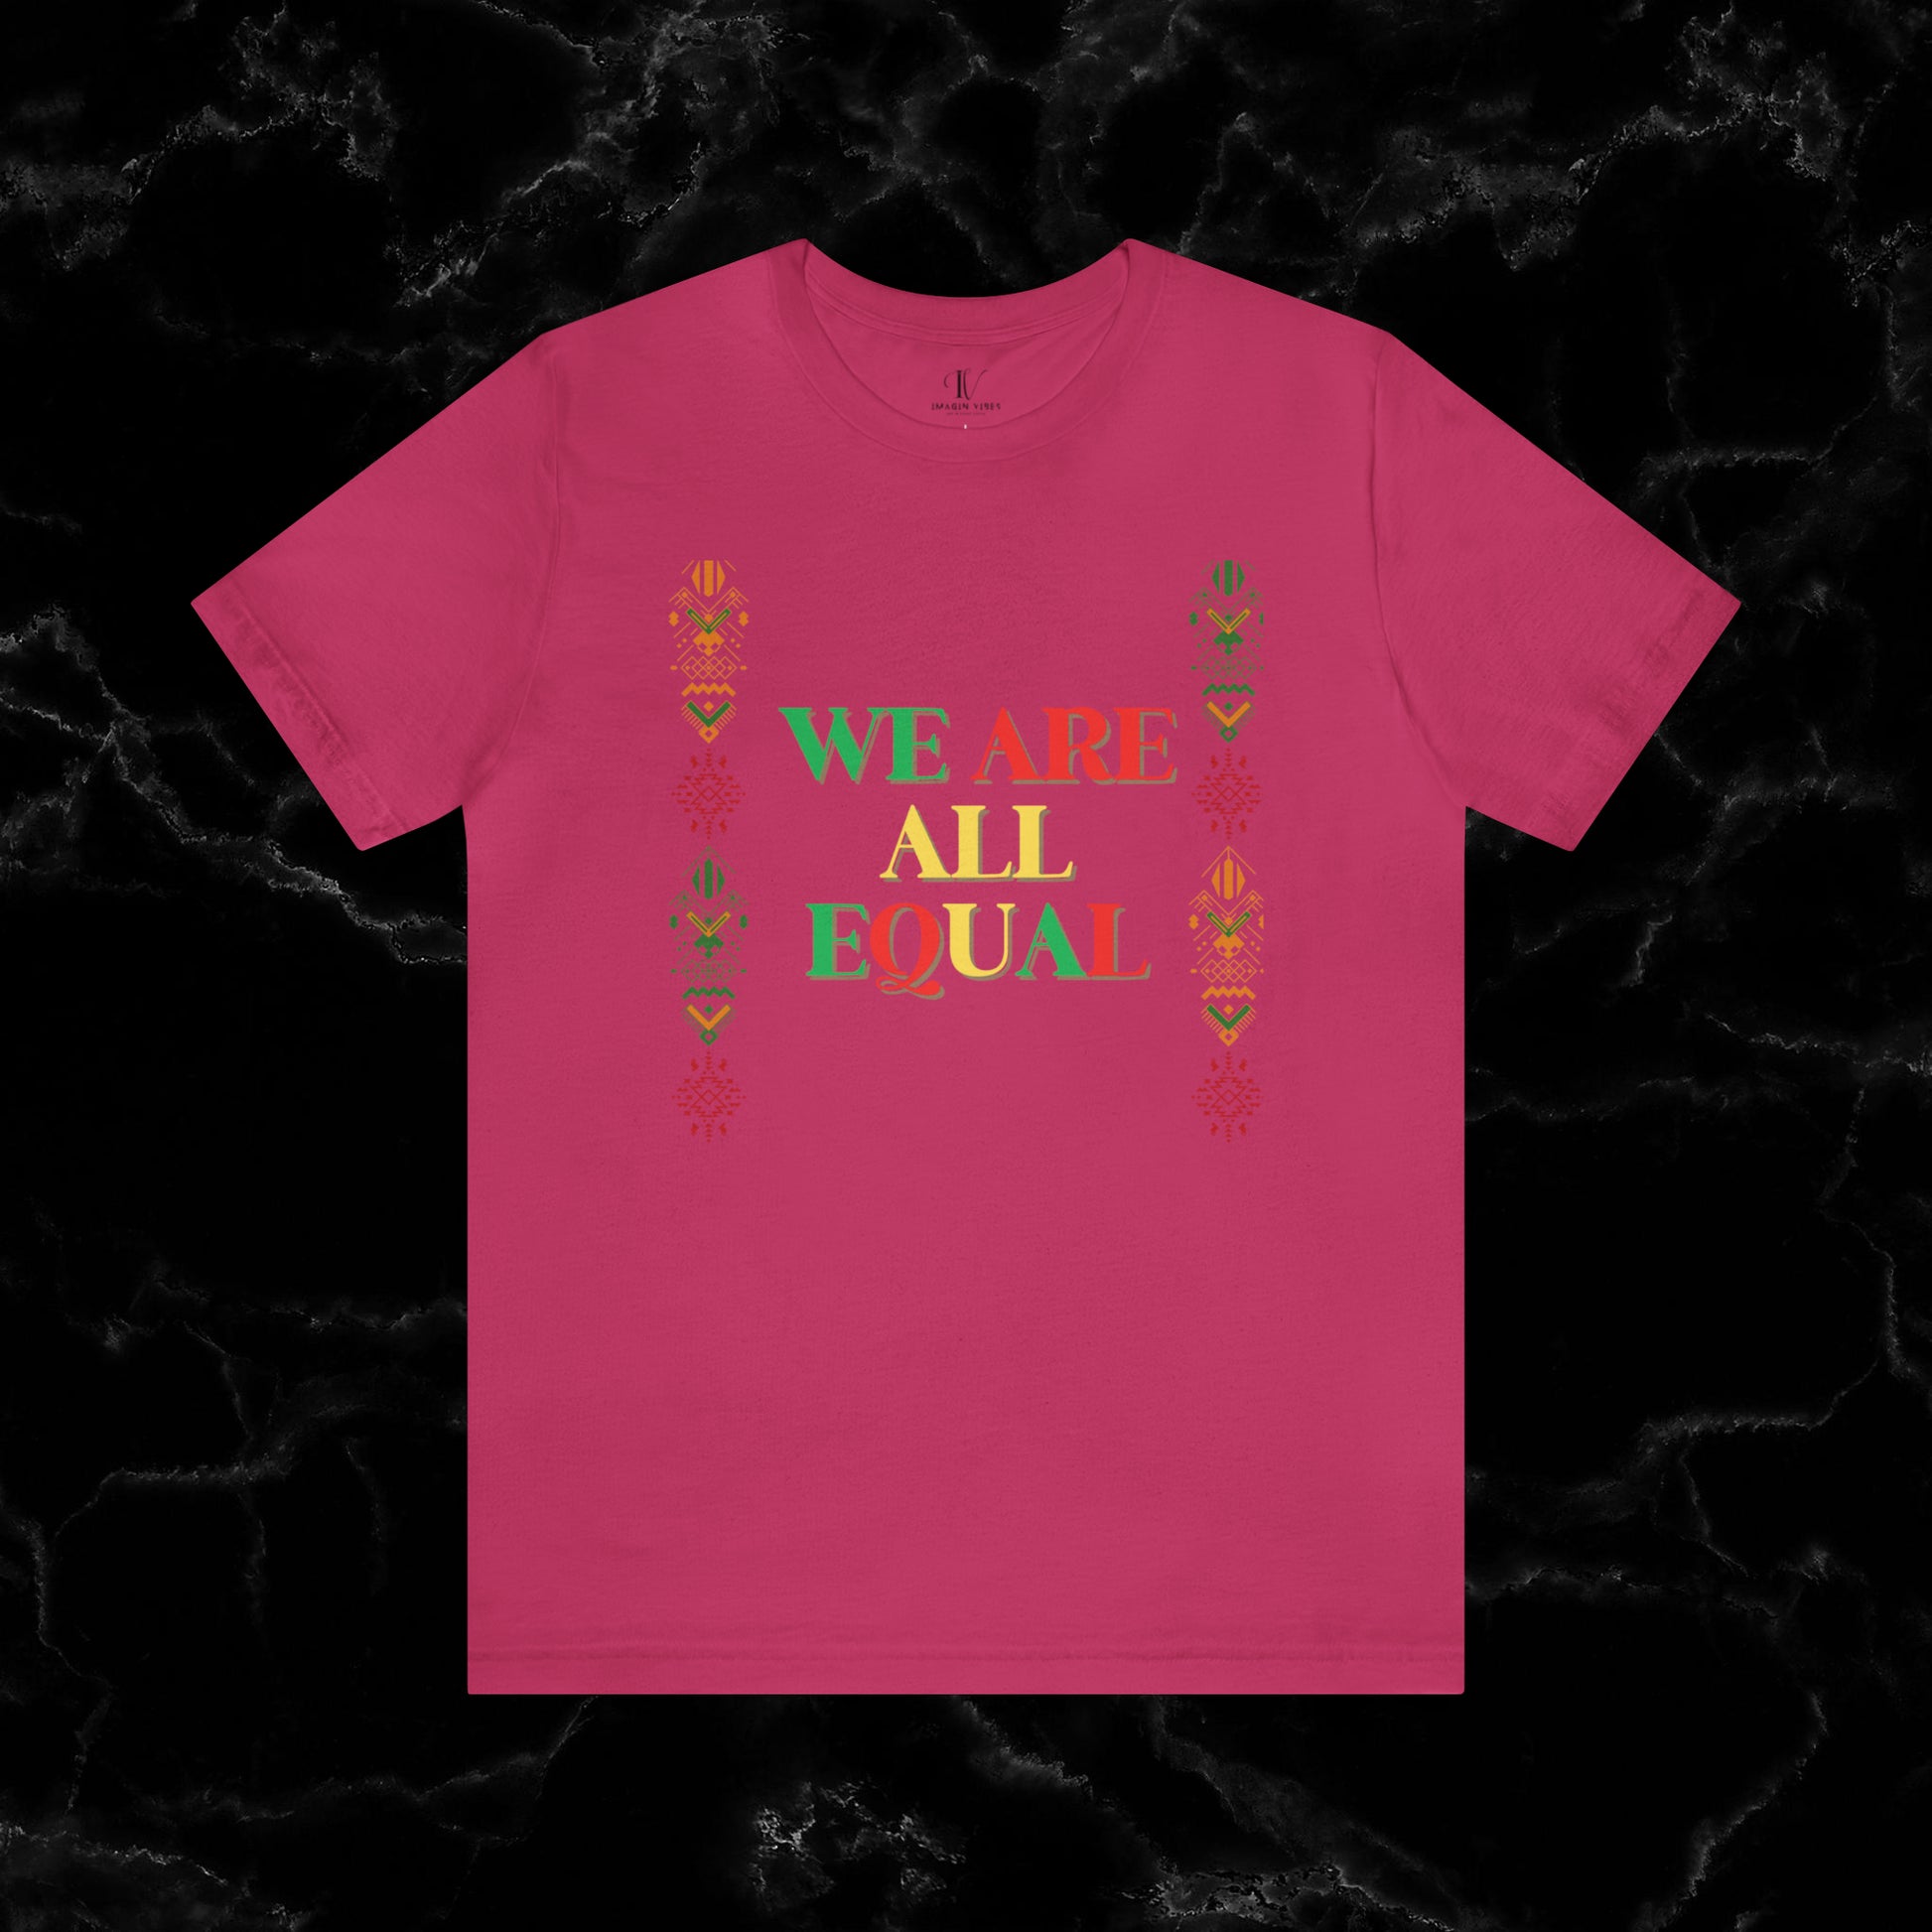 Trendy Black History Month Shirts Celebrating African American Pride and Heritage – We Are All Equal T-Shirt   